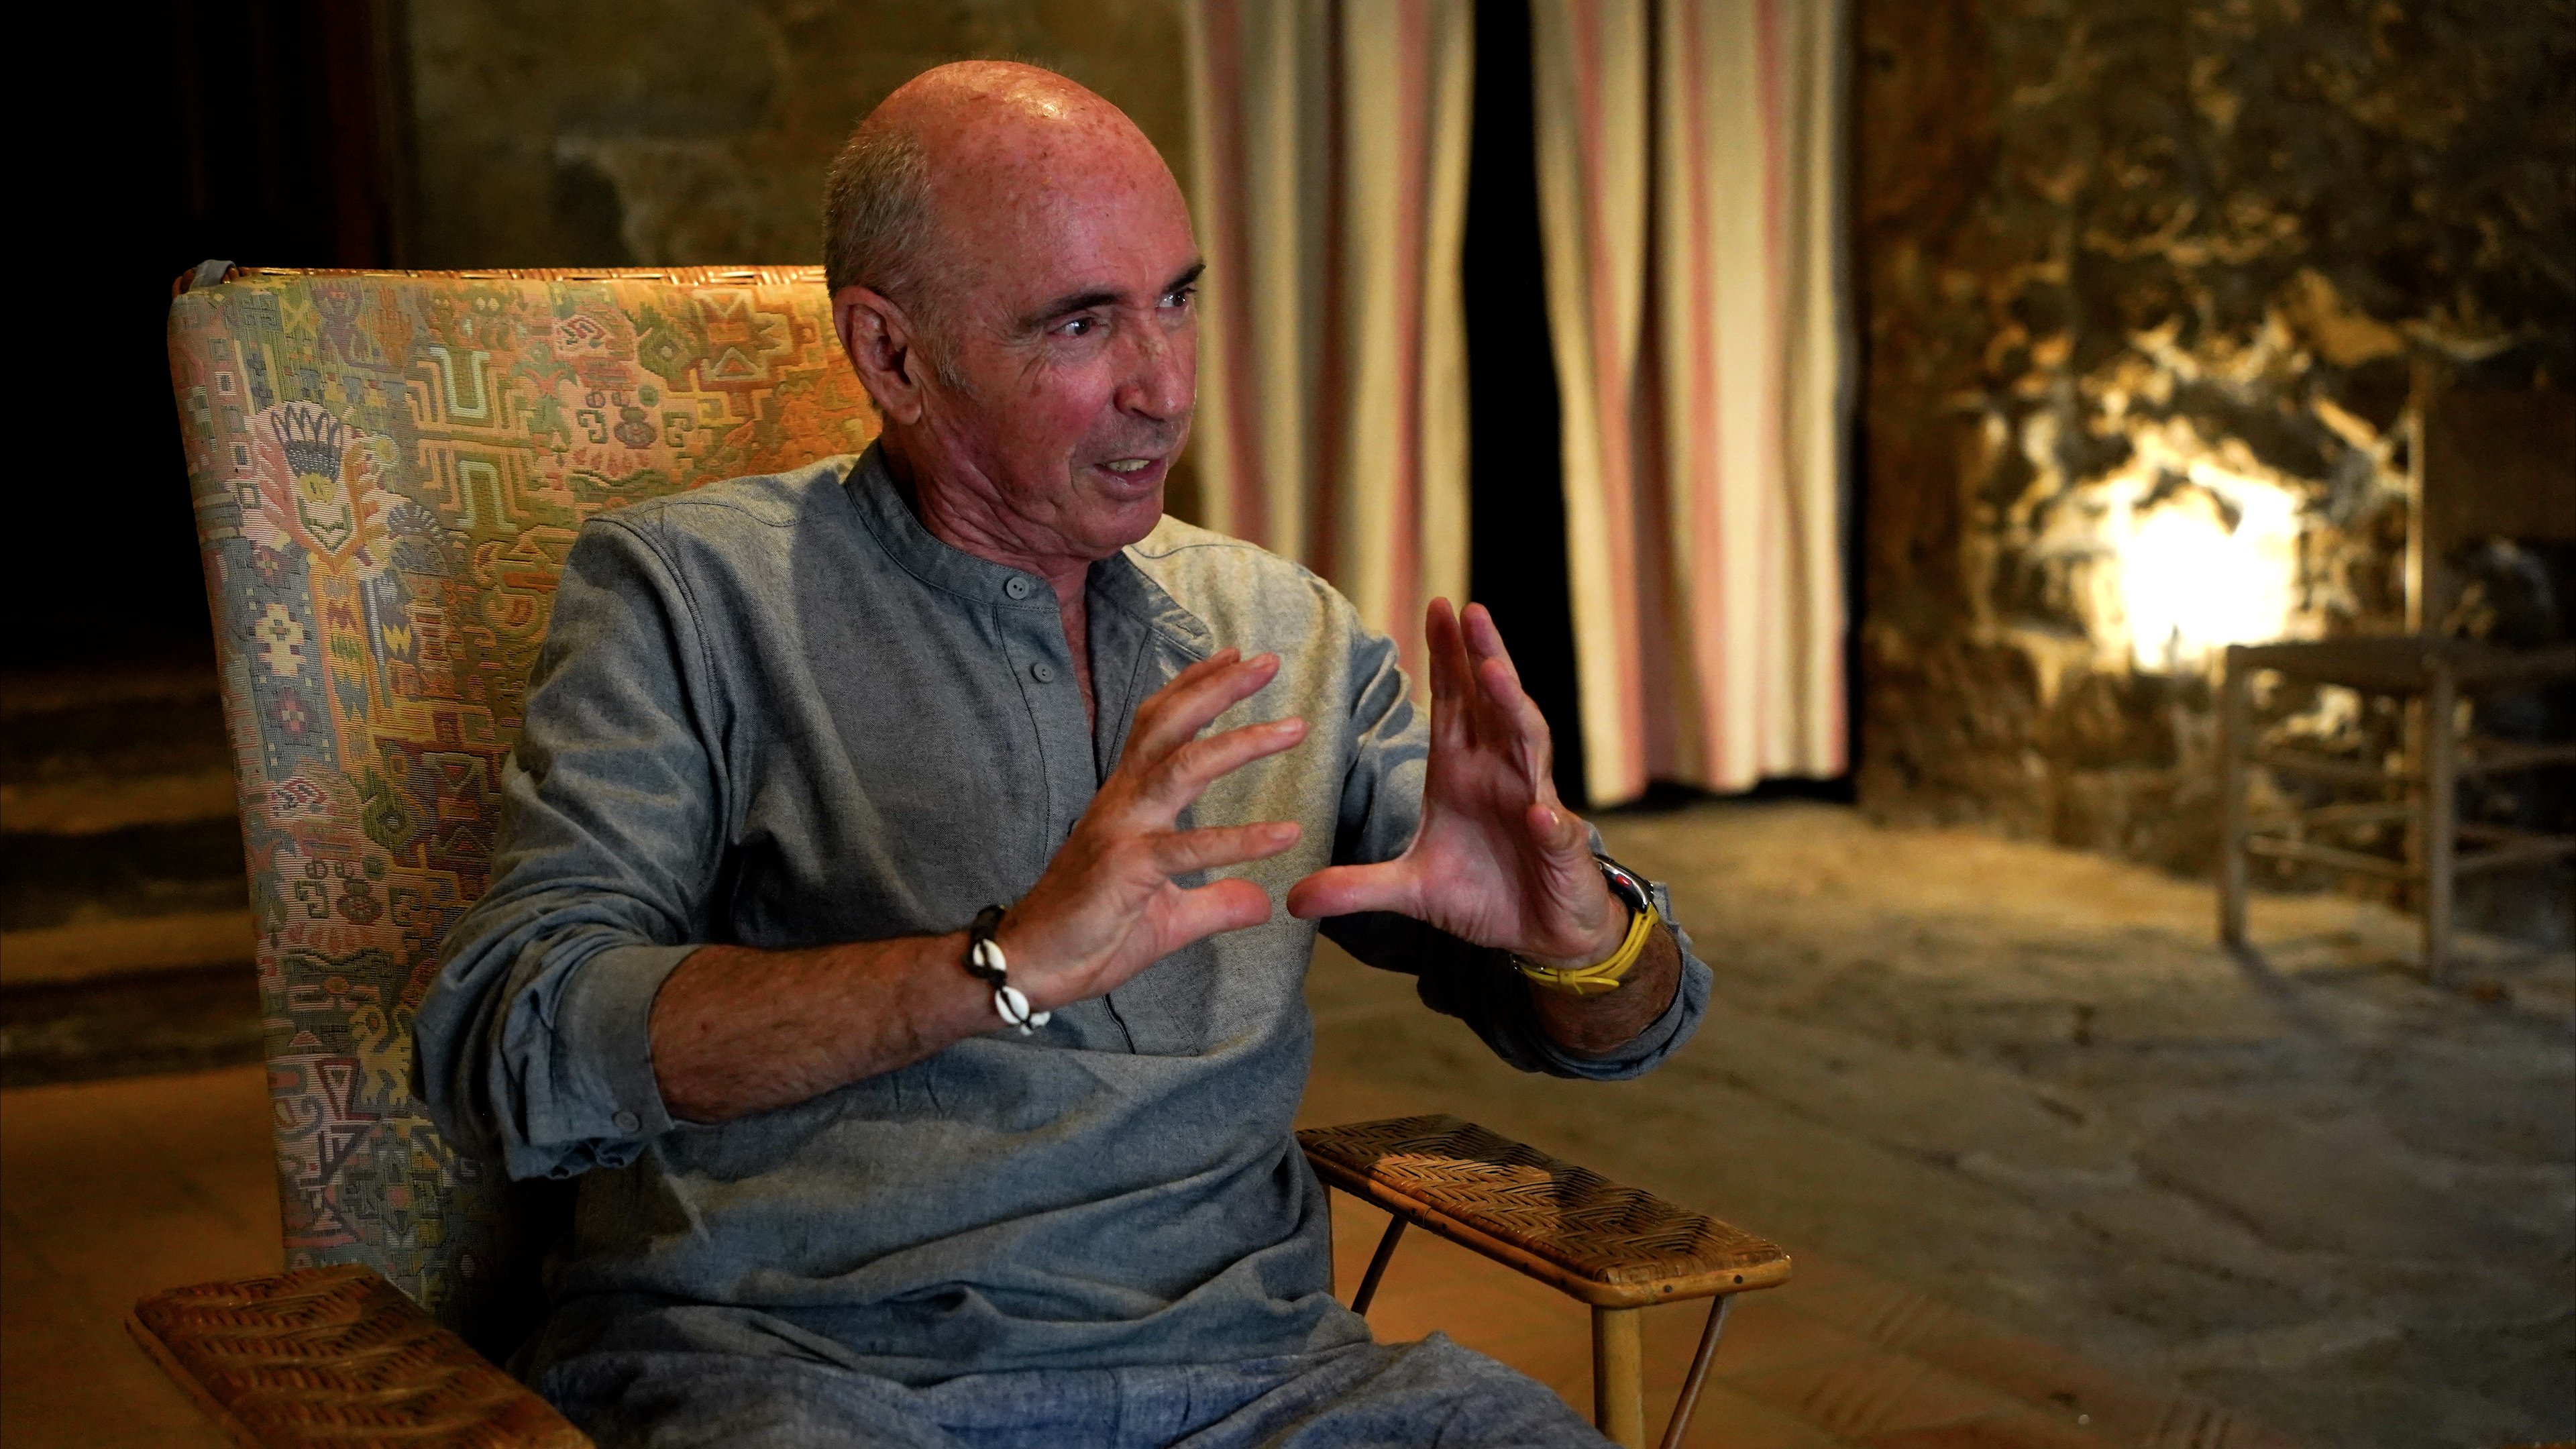 Lluís Llach: "We are in an era of neo-autonomism. It's a terrible mistake"